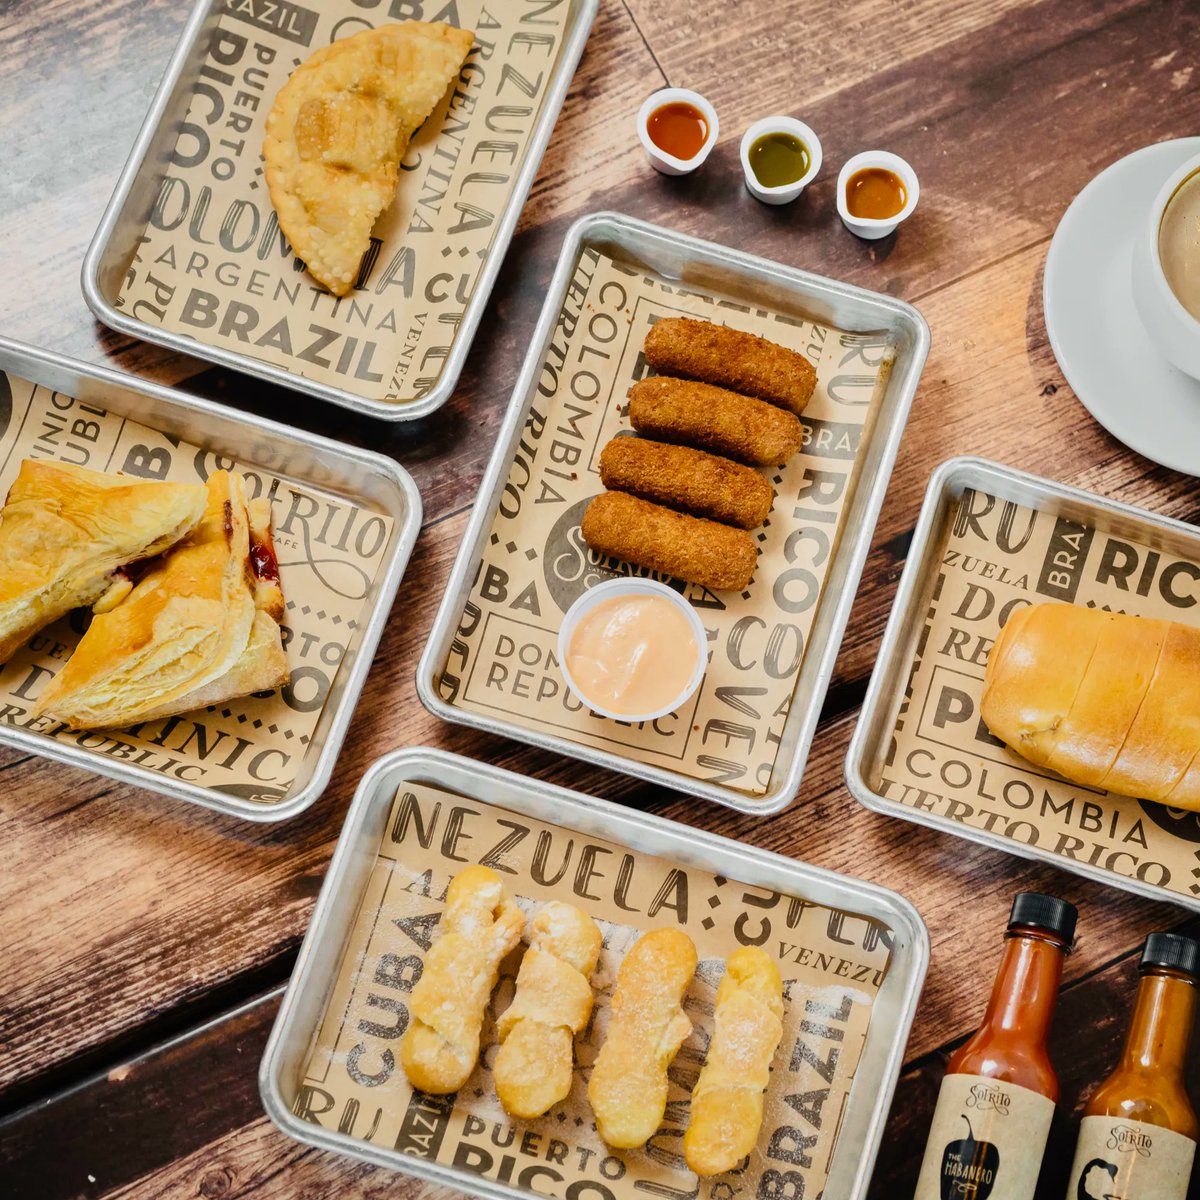 Don’t skip on Small Bites 👀 🤩

Tapas-style snacks with the freshest ingredients and authentic Latin flavors are the perfect way to start your meal.

#SmallBites #Appetizers #LatinFiesta #LOVESOFRITO